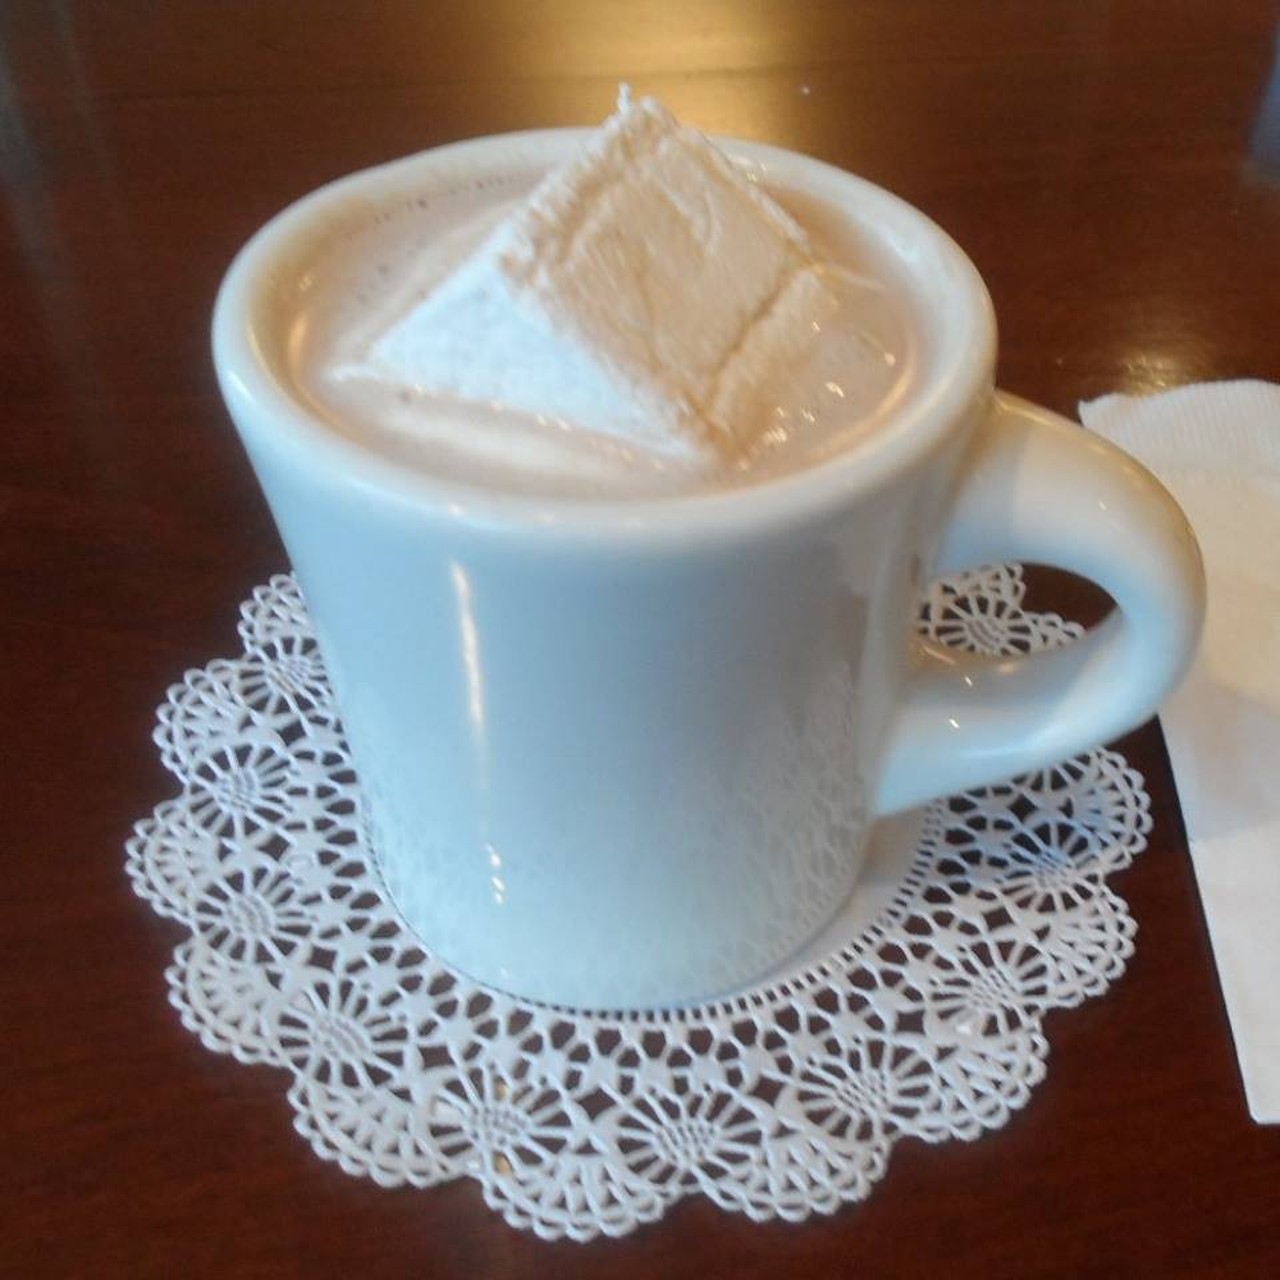 Sweet Moses is the ultimate hot chocolate destination. In fact, they use a recipe from 1911, and top it all off with a marshmallow square! Enjoy a cup today at 6800 Detroit Ave., Gordon Square, 216.651.2202.